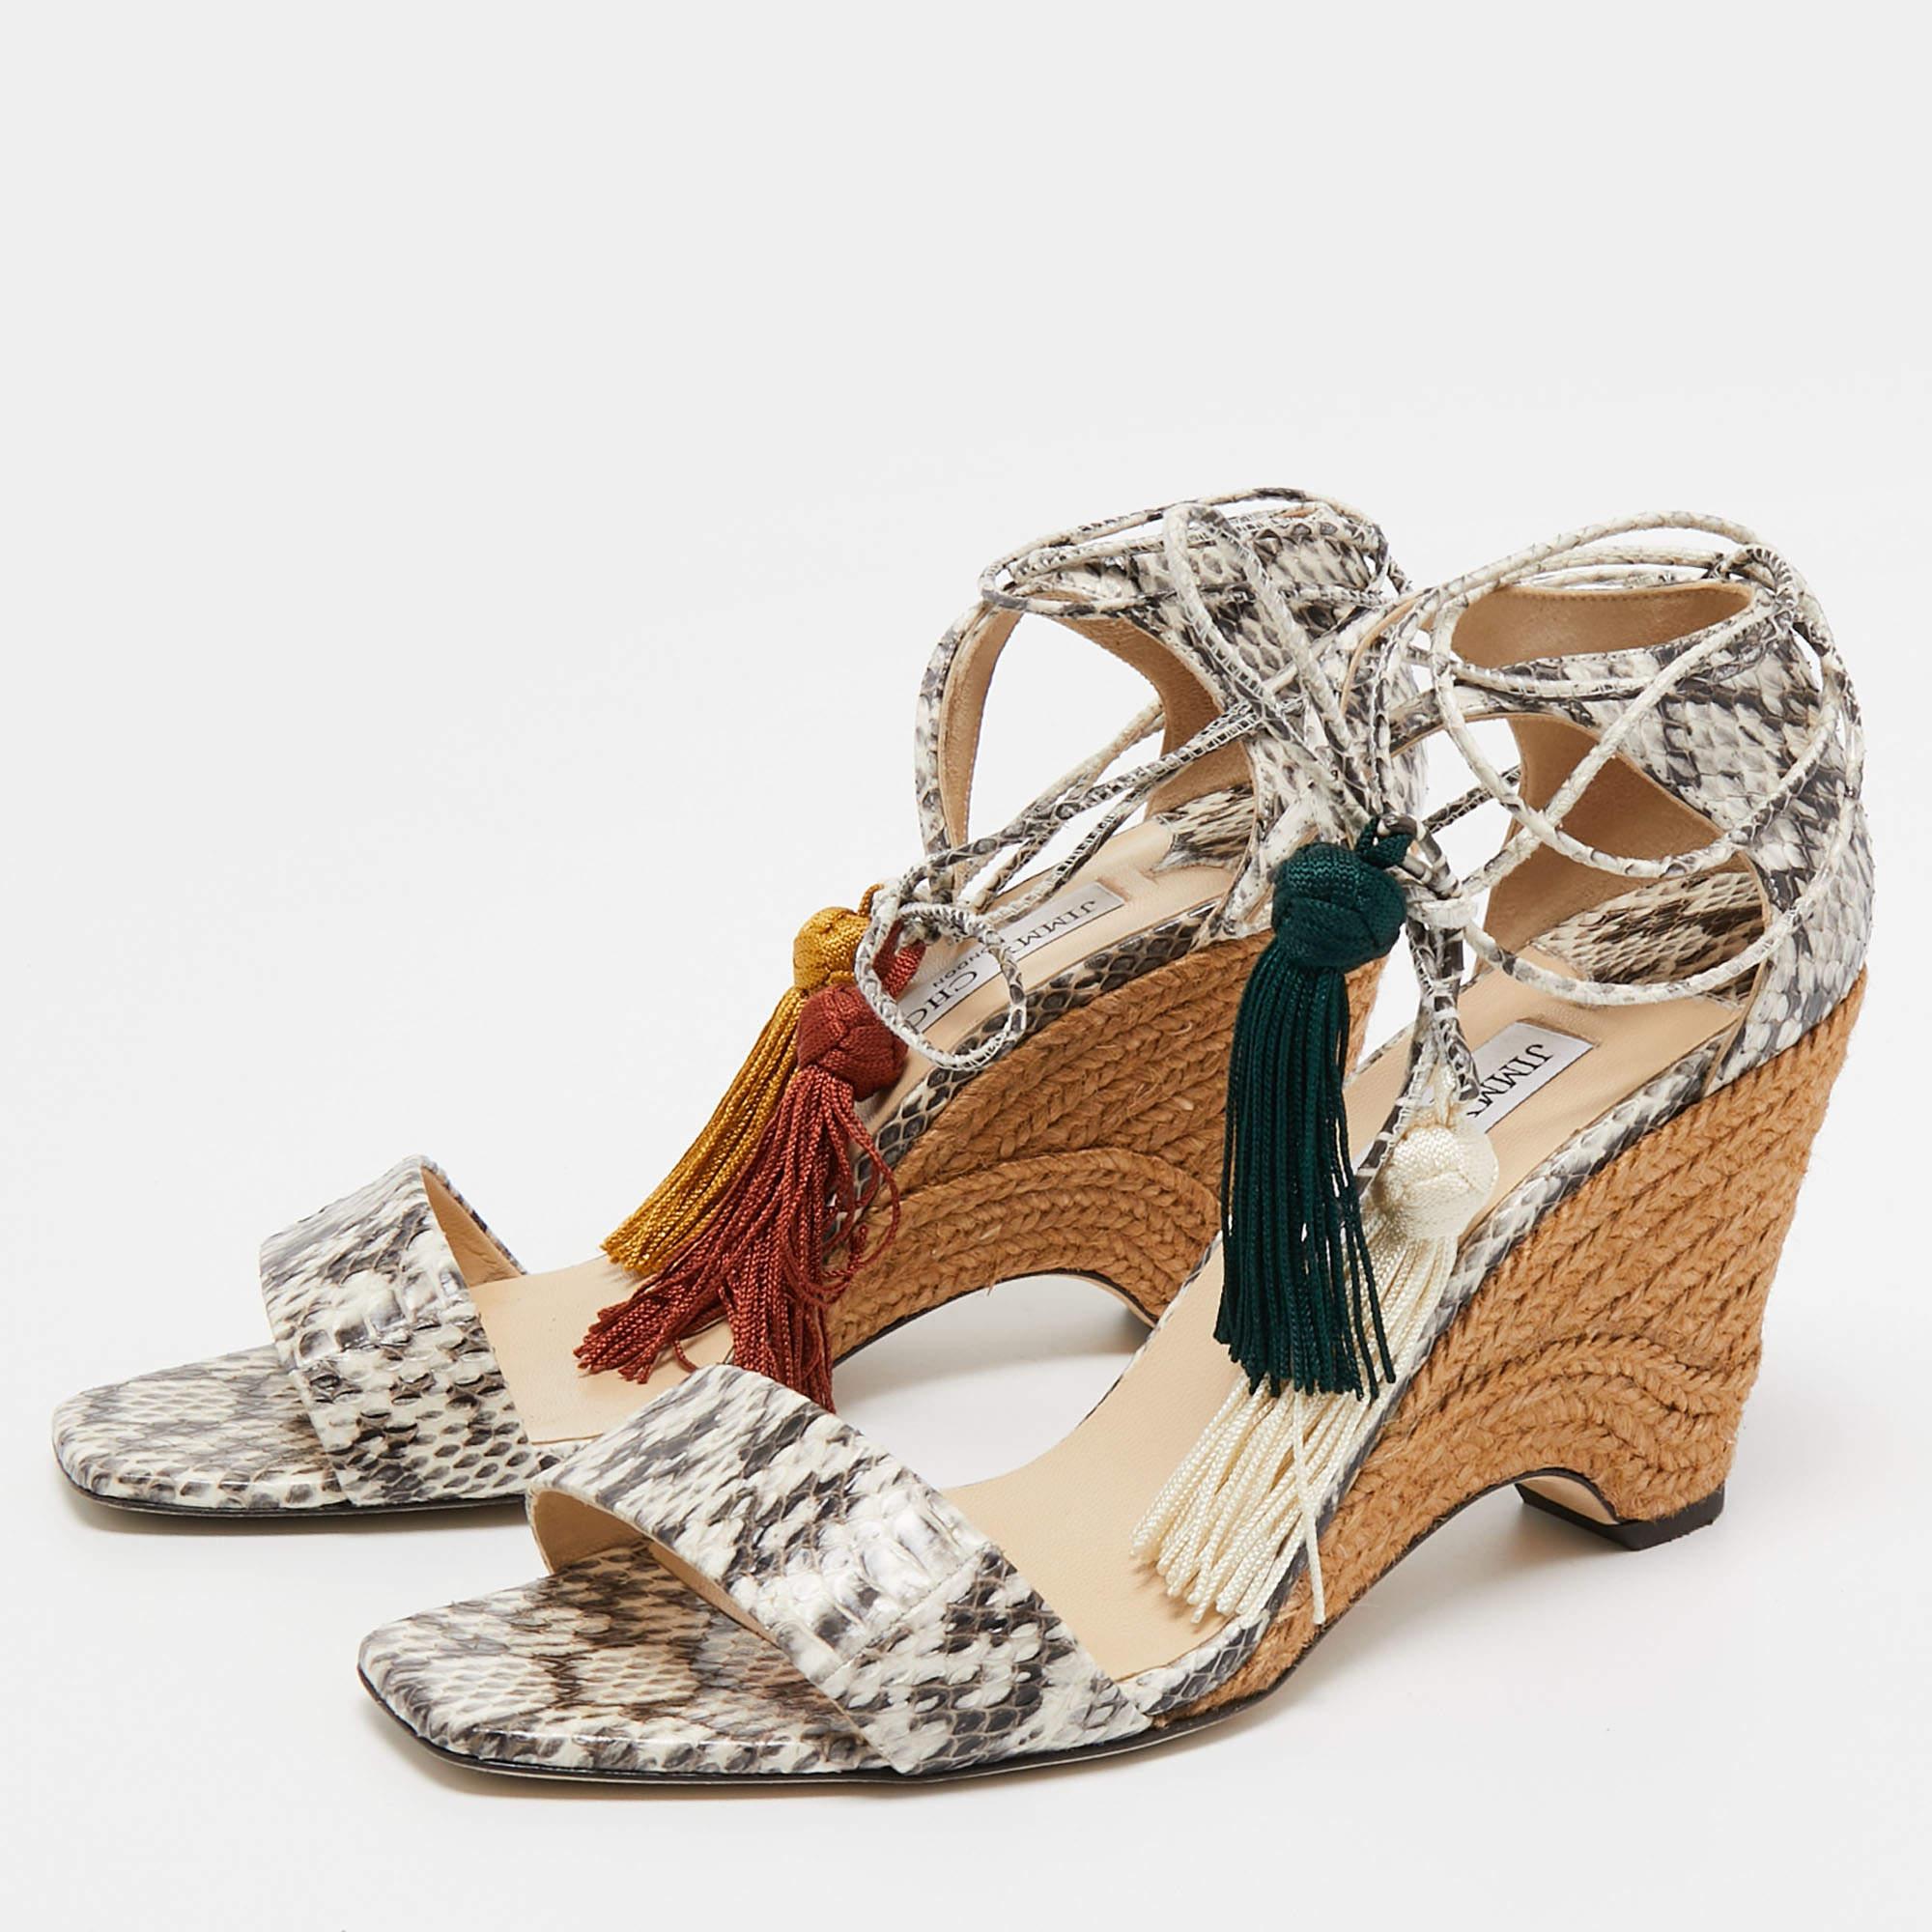 Jimmy Choo Brown/Cream Python Leather Wedge Sandals Size 40.5 In Good Condition For Sale In Dubai, Al Qouz 2